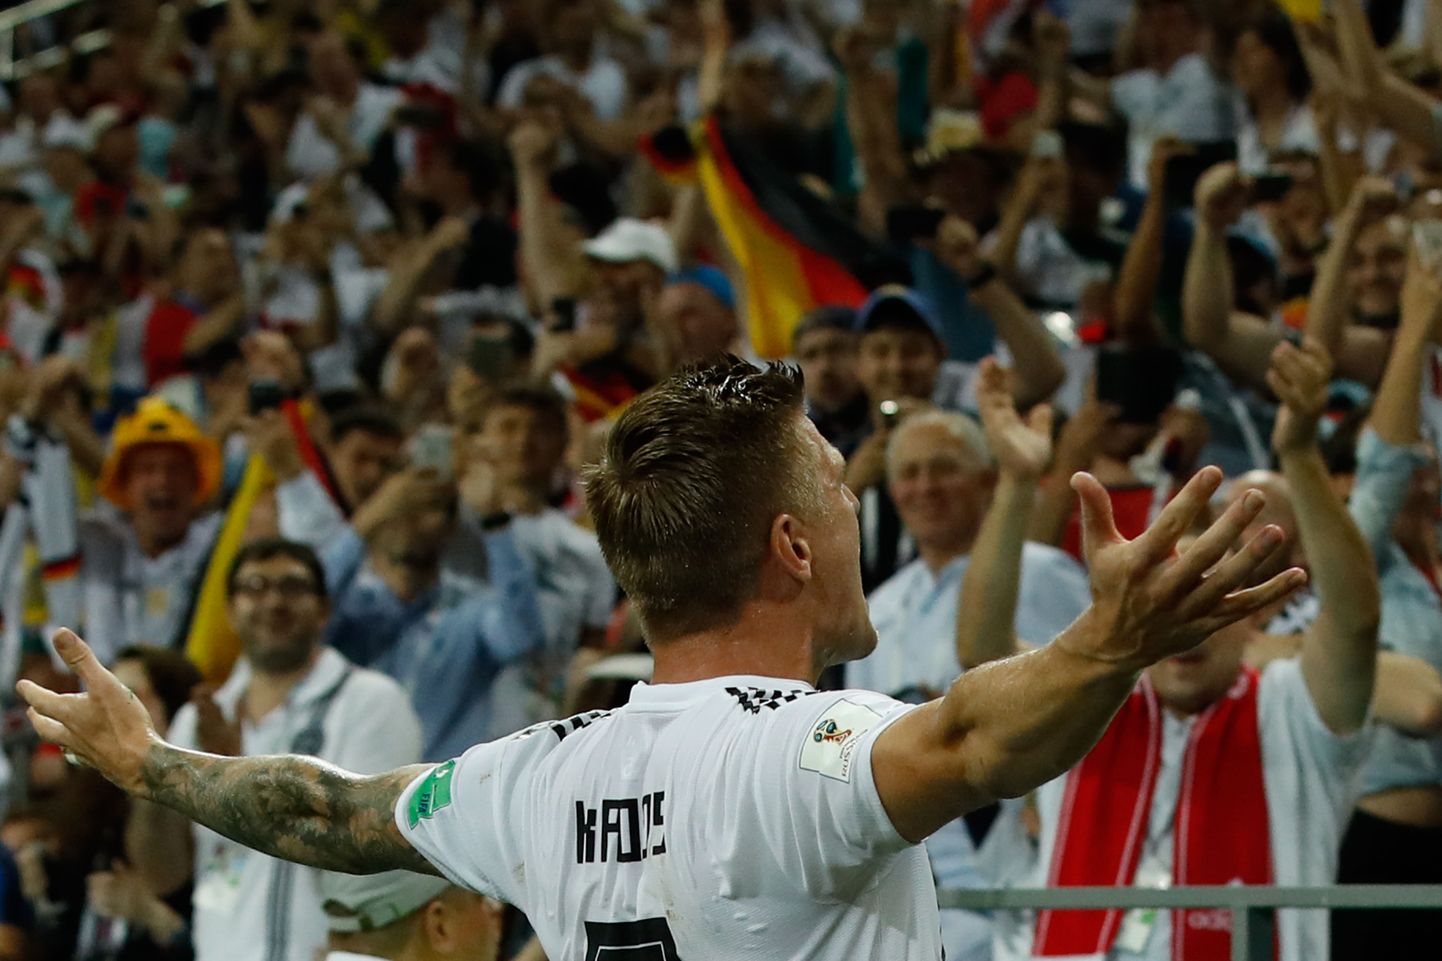 Germany's midfielder Toni Kroos celebrates with supporters after scoring a goal during the Russia 2018 World Cup Group F football match between Germany and Sweden at the Fisht Stadium in Sochi on June 23, 2018. / AFP PHOTO / Odd ANDERSEN / RESTRICTED TO EDITORIAL USE - NO MOBILE PUSH ALERTS/DOWNLOADS